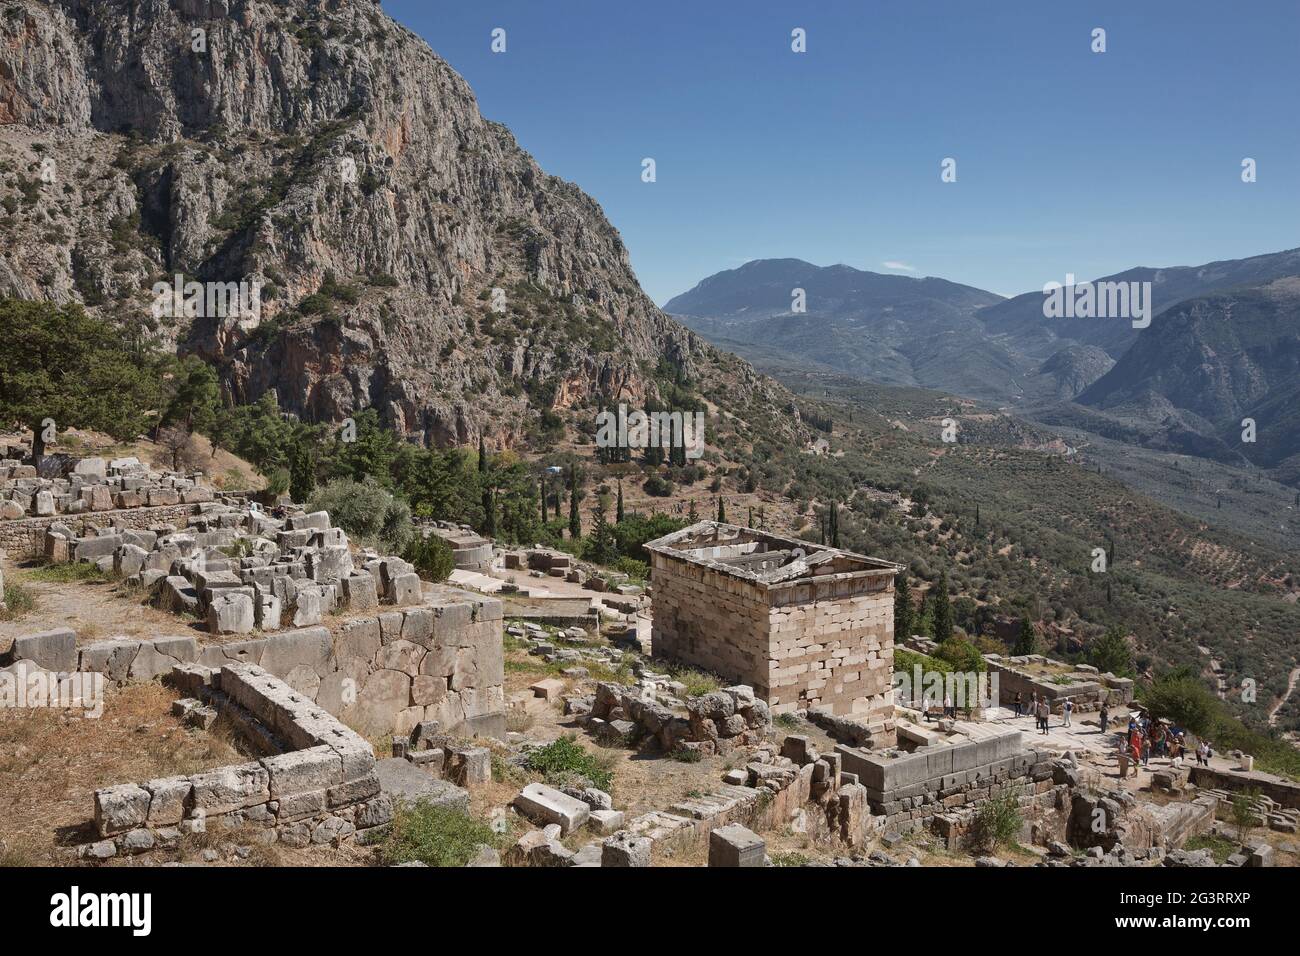 Archaelogical site of Delphi, Greece. Delphi is ancient sanctuary that grew rich as seat of oracle Stock Photo